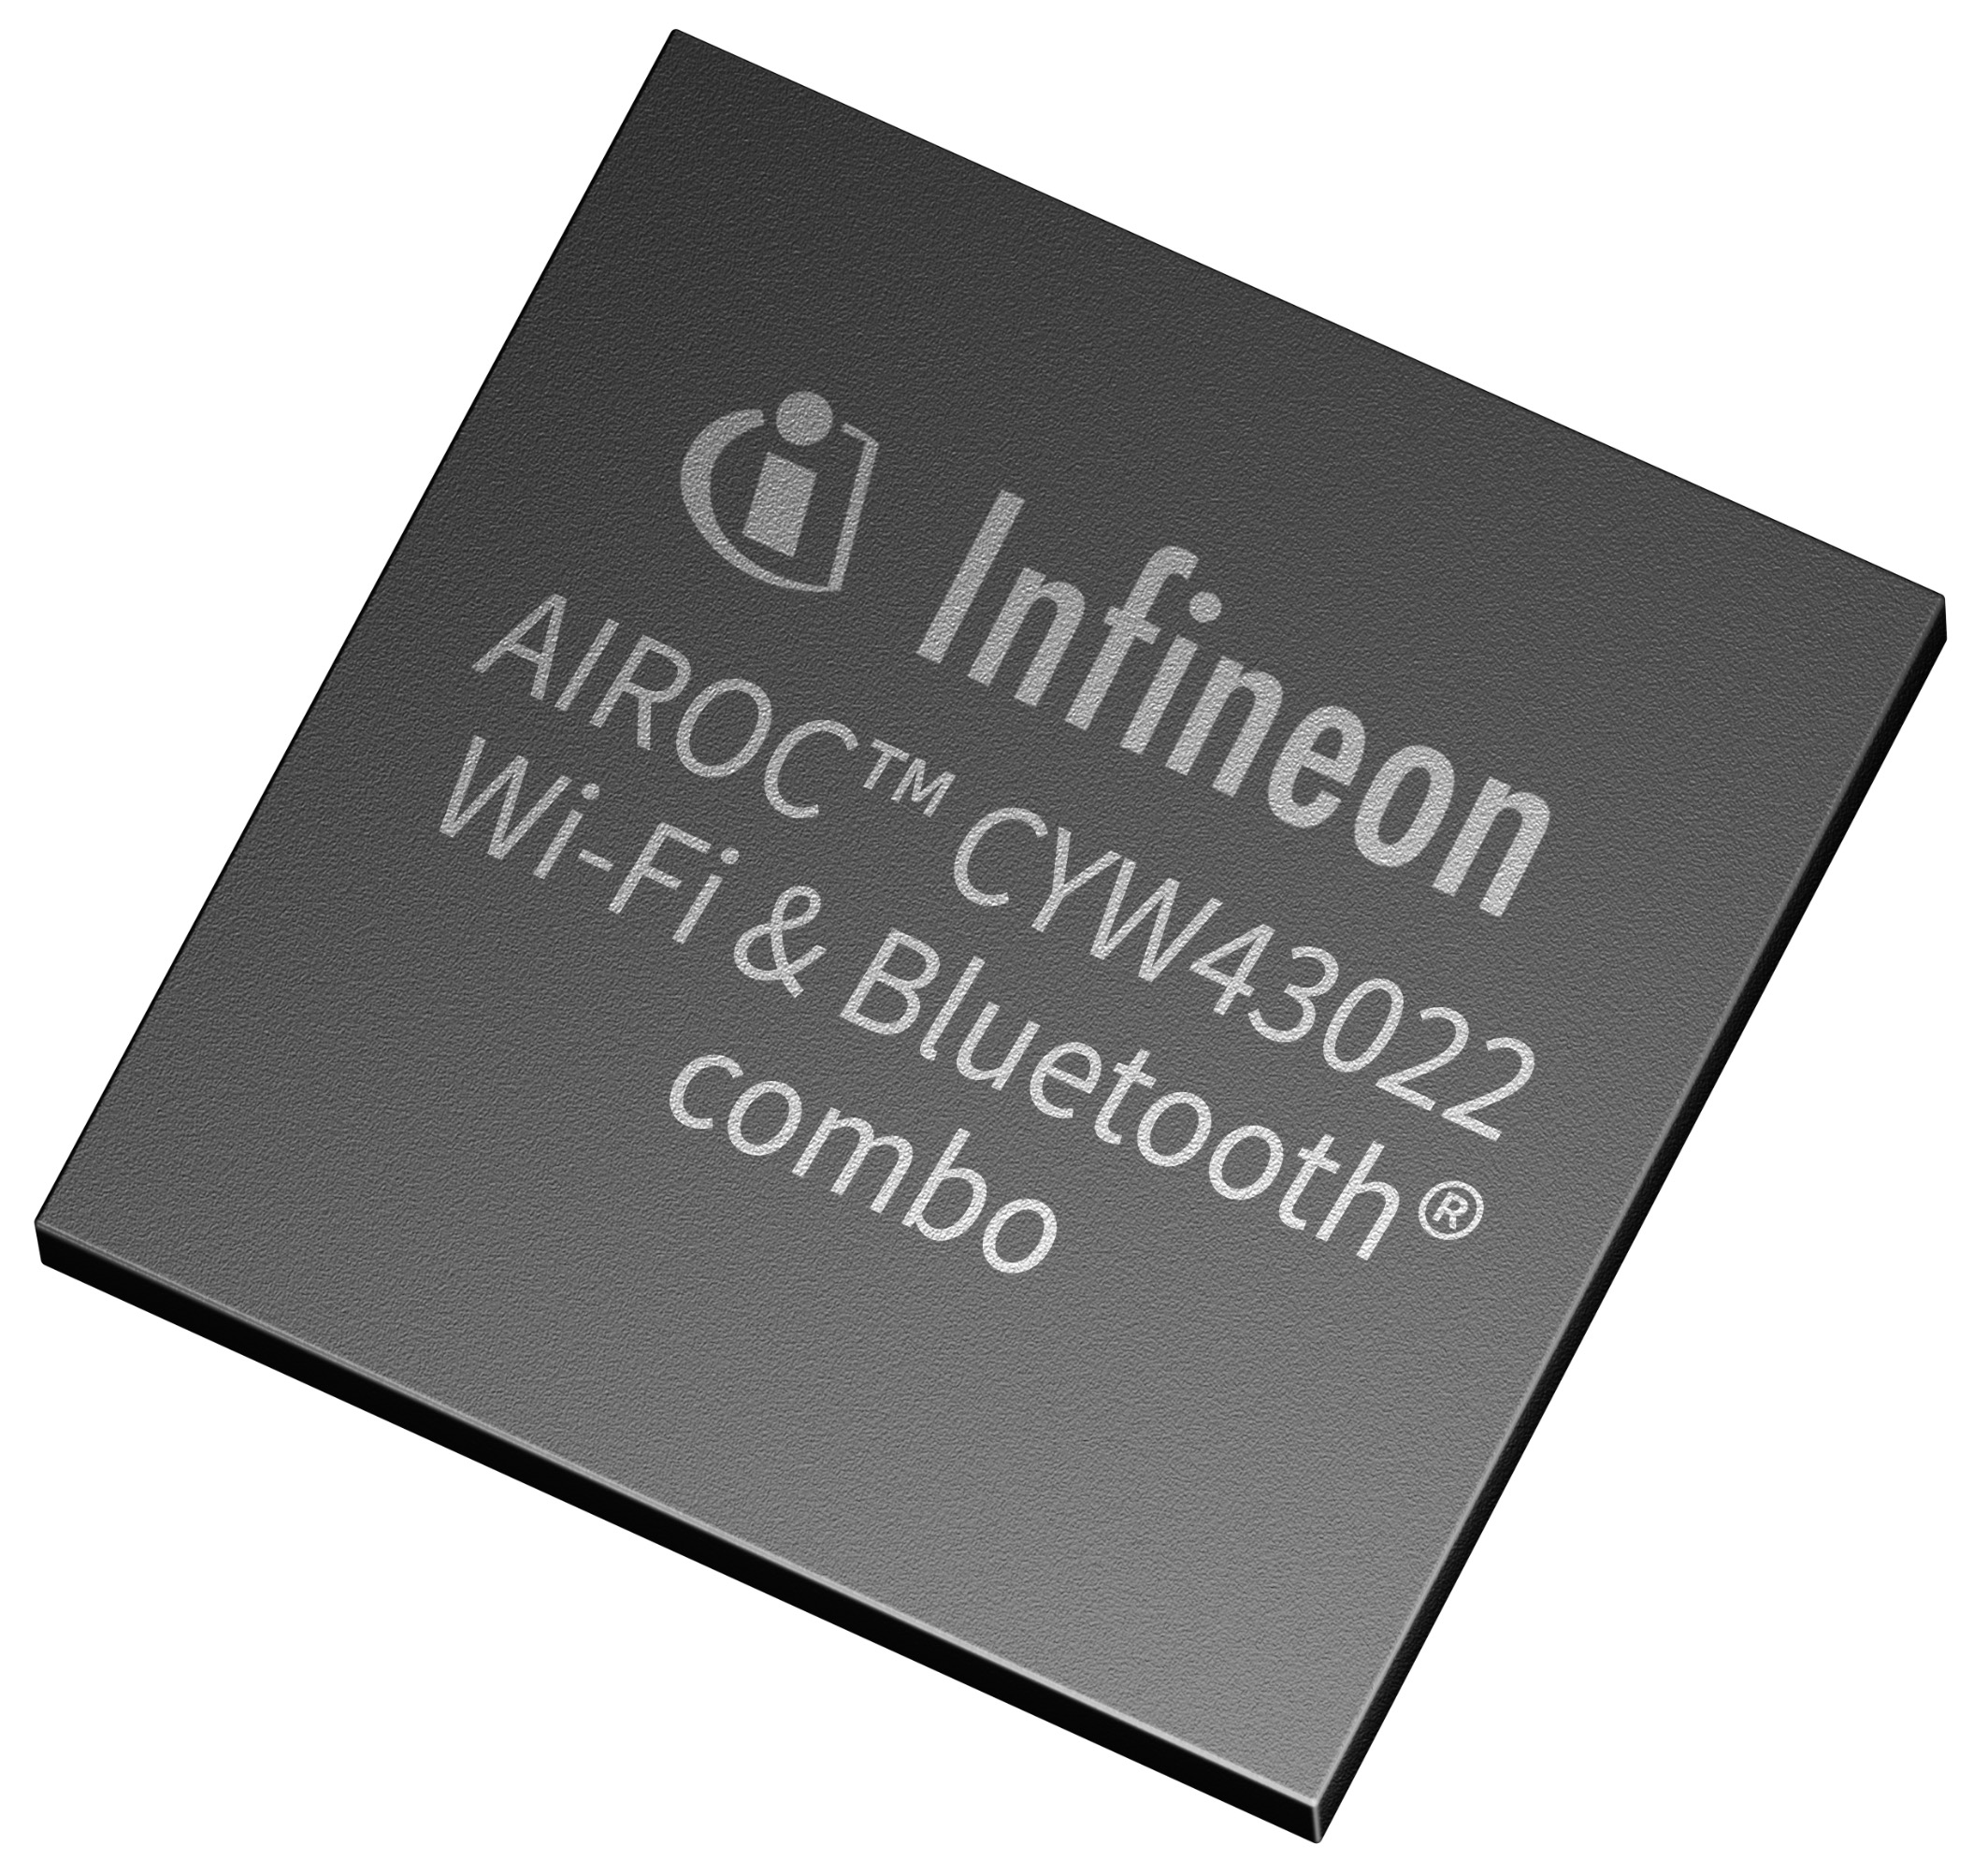 Infineon introduces AIROC™ CYW43022 Wi-Fi 5 and Bluetooth® 2-in-1 product, which reduces power consumption by 65%, significantly extending battery life in IoT applications - Imagen